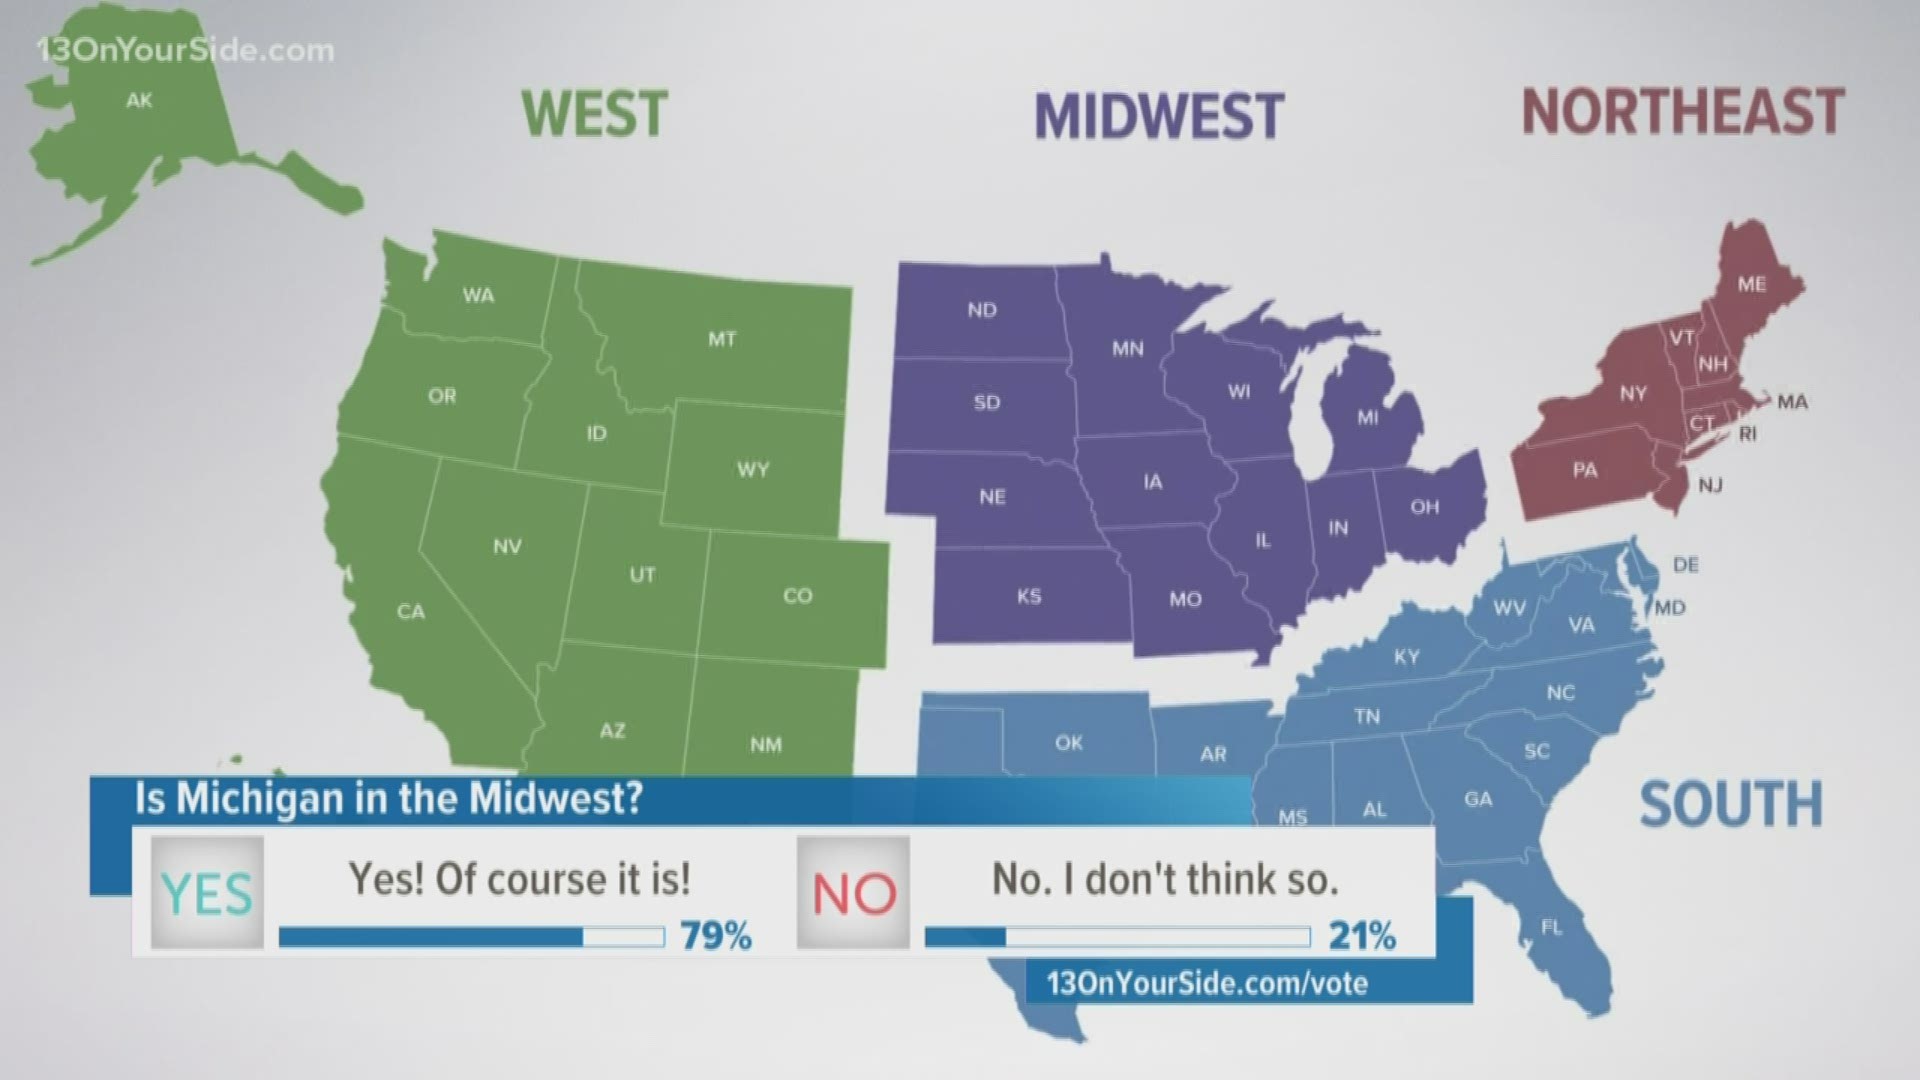 We asked Michiganders what they think.